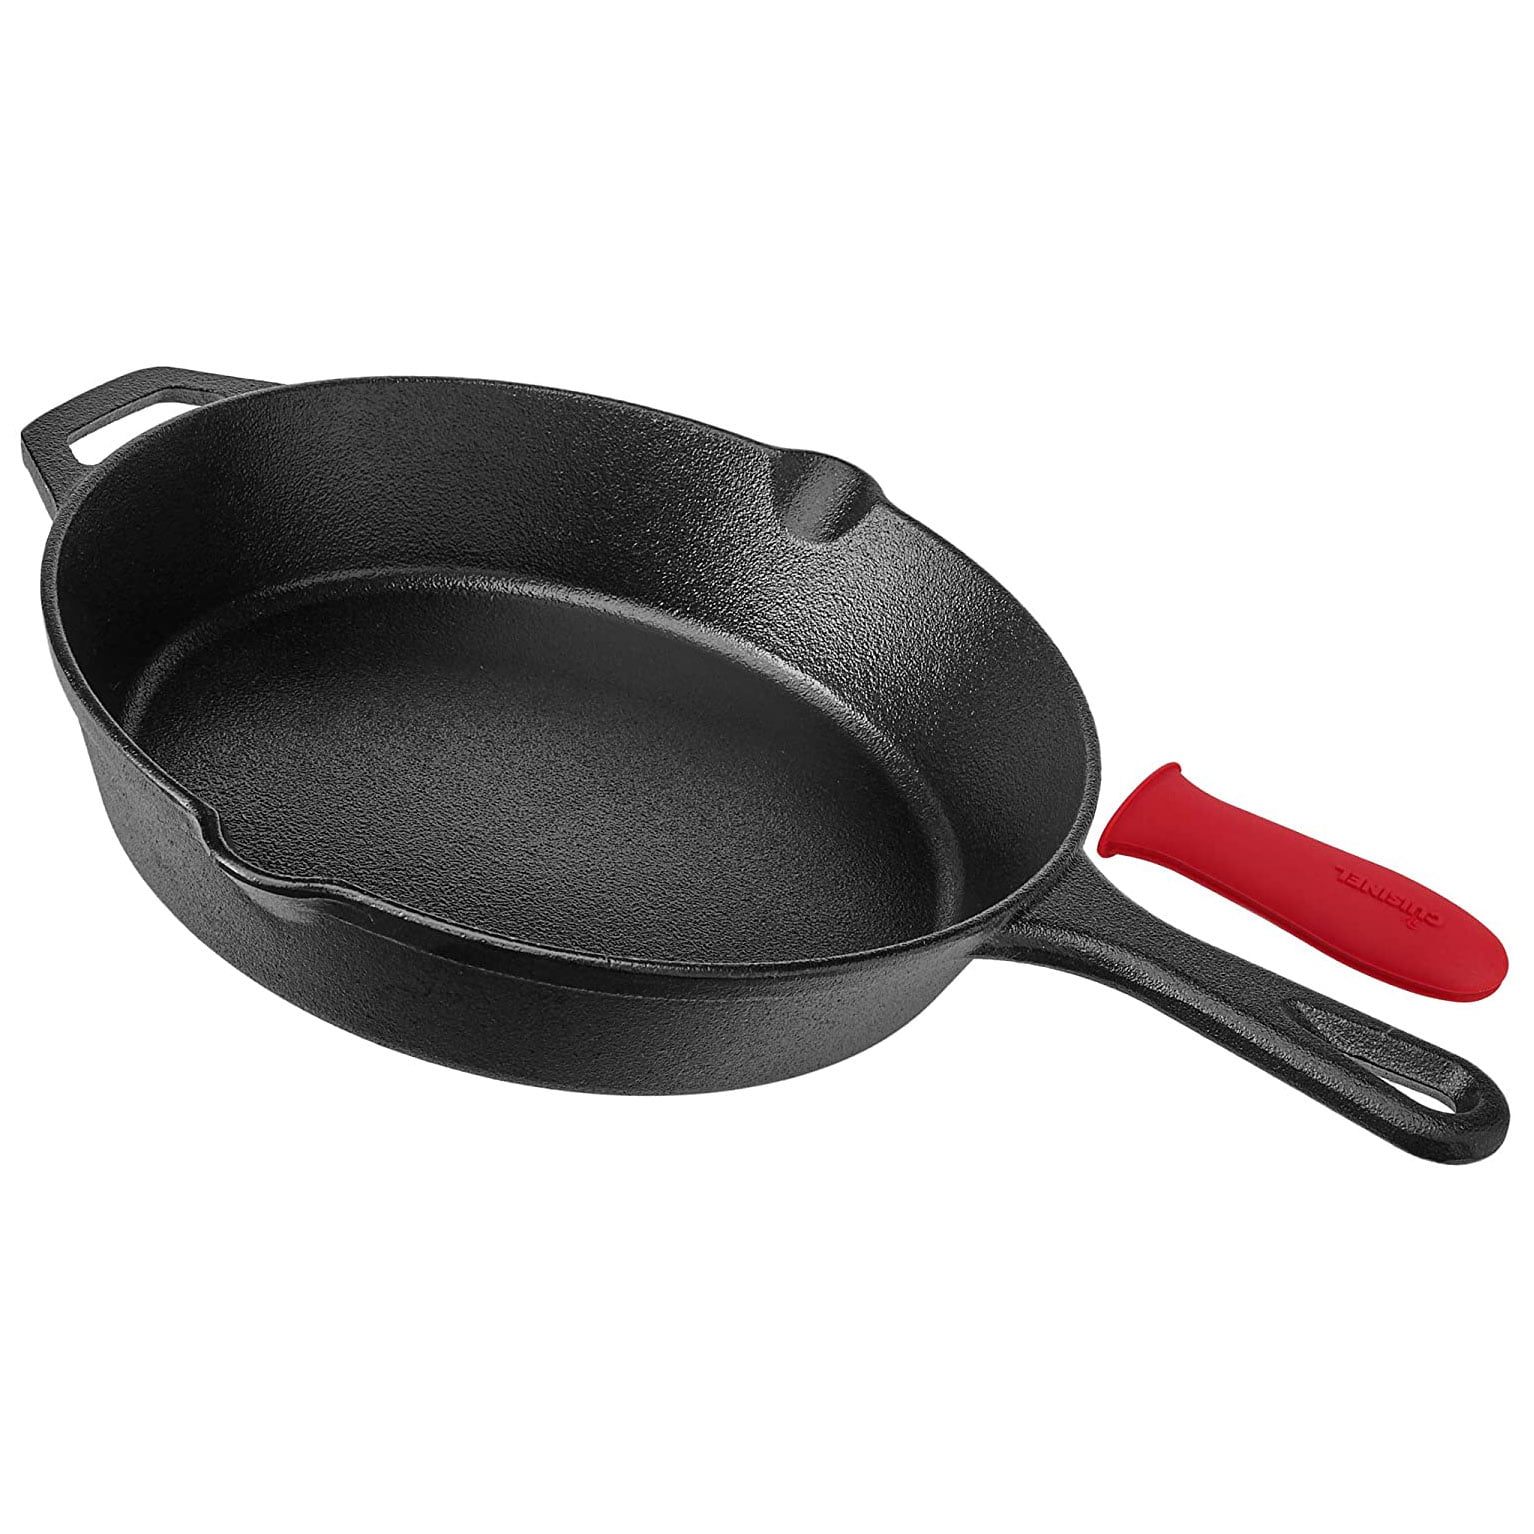 Lodge Pre-Seasoned Cast Iron Skillet With Assist Handle, 10.25, Black &  Tempered Glass Lid (10.25 Inch) – Fits 10-10.25 Inch Cast Iron Skillets and  5